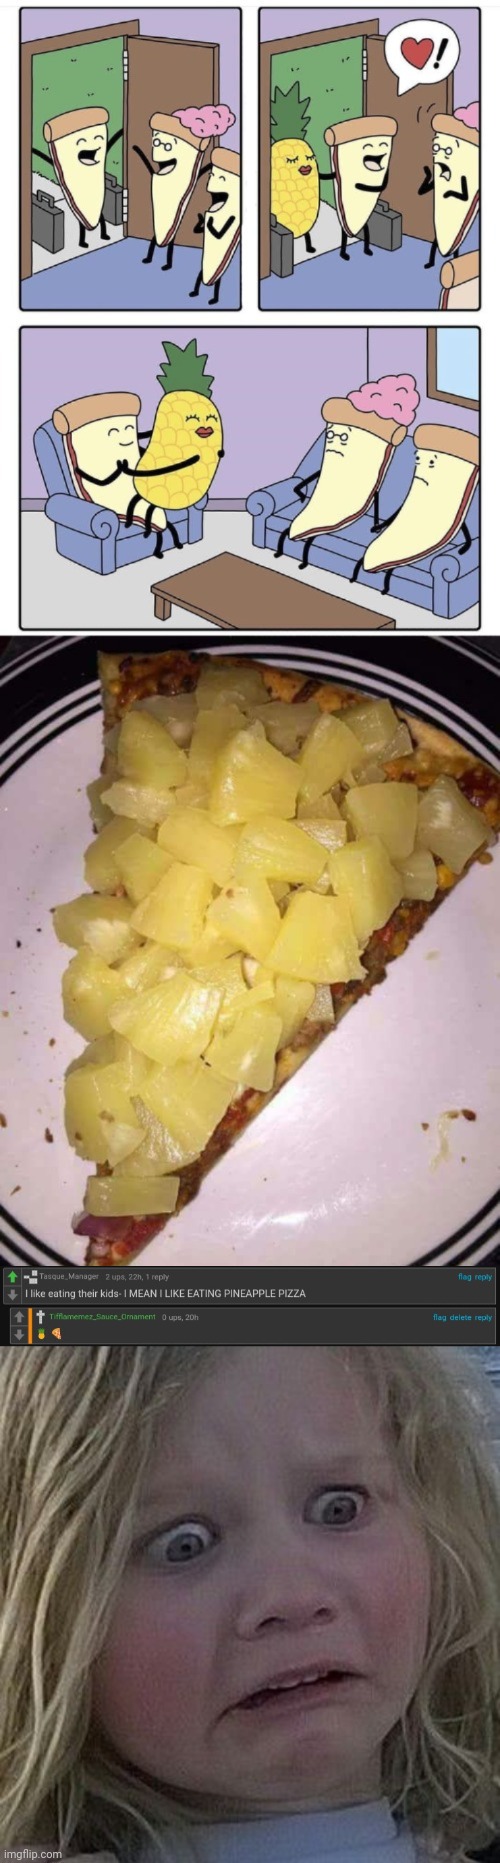 Pineapple pizza | image tagged in scared kid,pineapple pizza,children,memes,comments,comment section | made w/ Imgflip meme maker